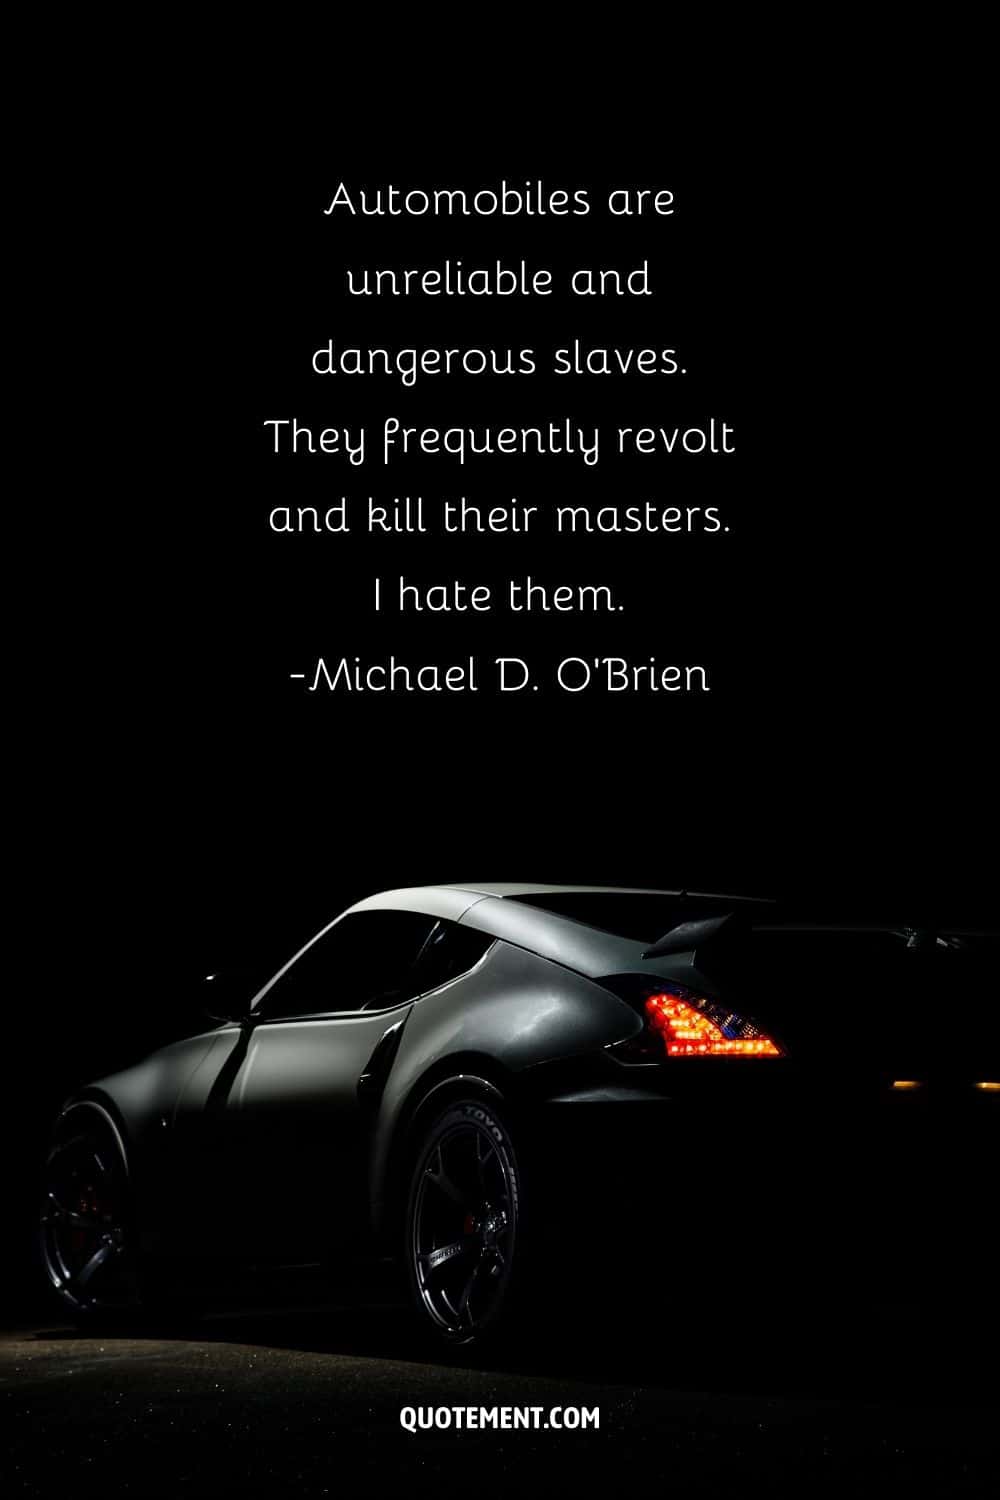 “Automobiles are unreliable and dangerous slaves. They frequently revolt and kill their masters. I hate them.” ― Michael D. O'Brien, The Island of the World